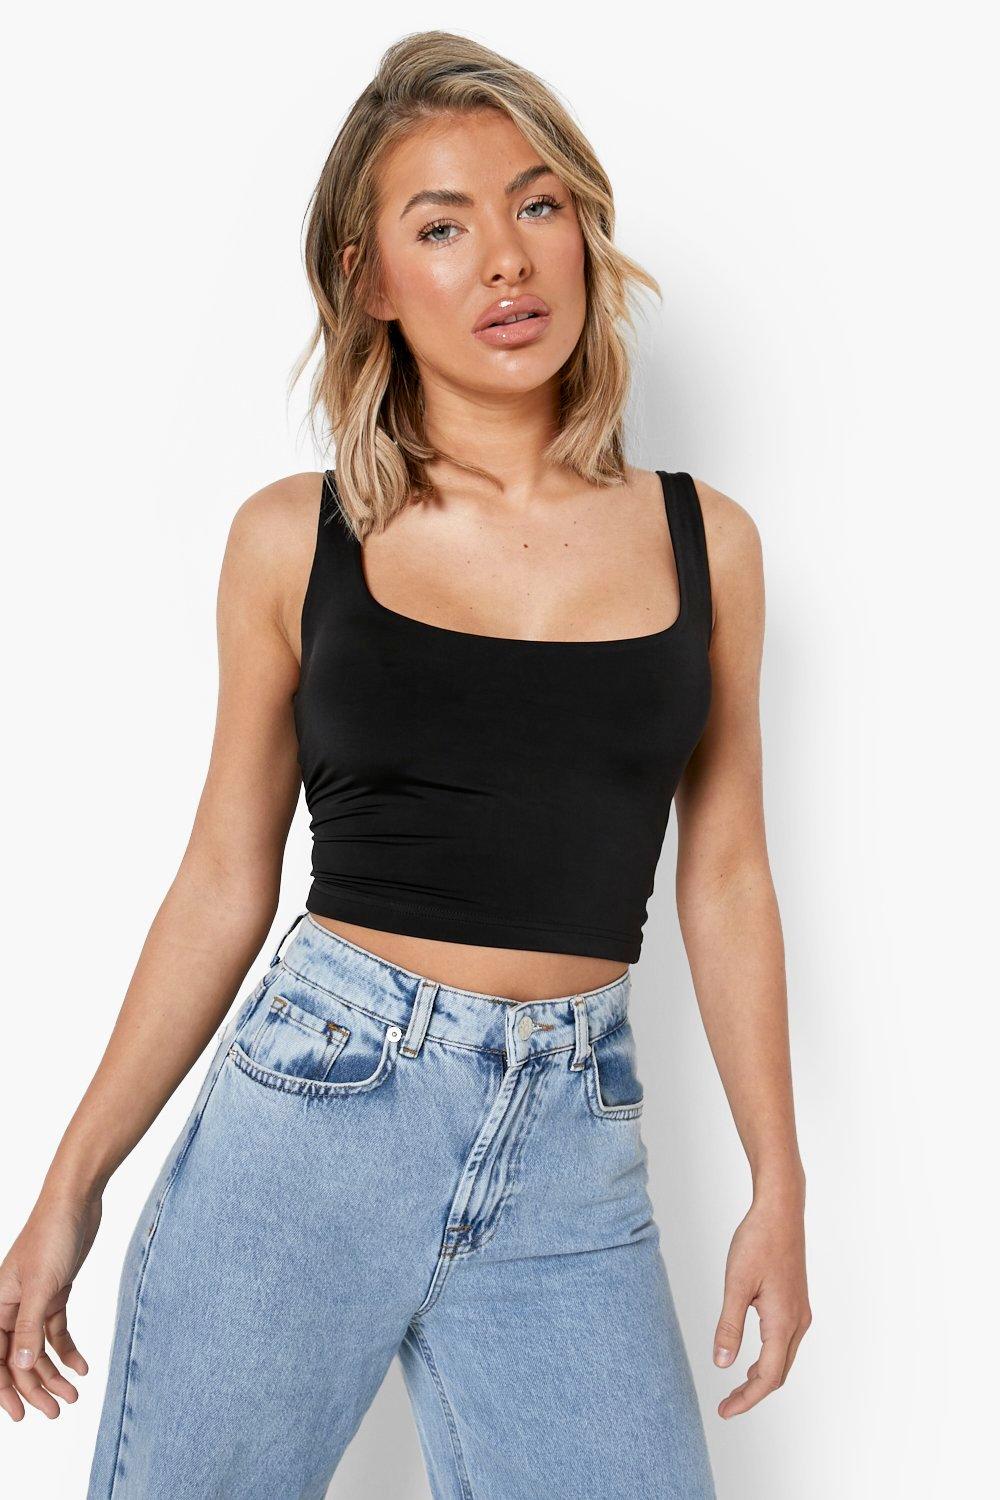 wannabemuse - Cropped layered square neck top, inner strap, Sleeveless,  diagonal, unbuttoned cap, built-in cap, square bra top, sleeveless tube top,  two-way wangbbong, Sleeveless strap, tank top, 3col - Codibook.